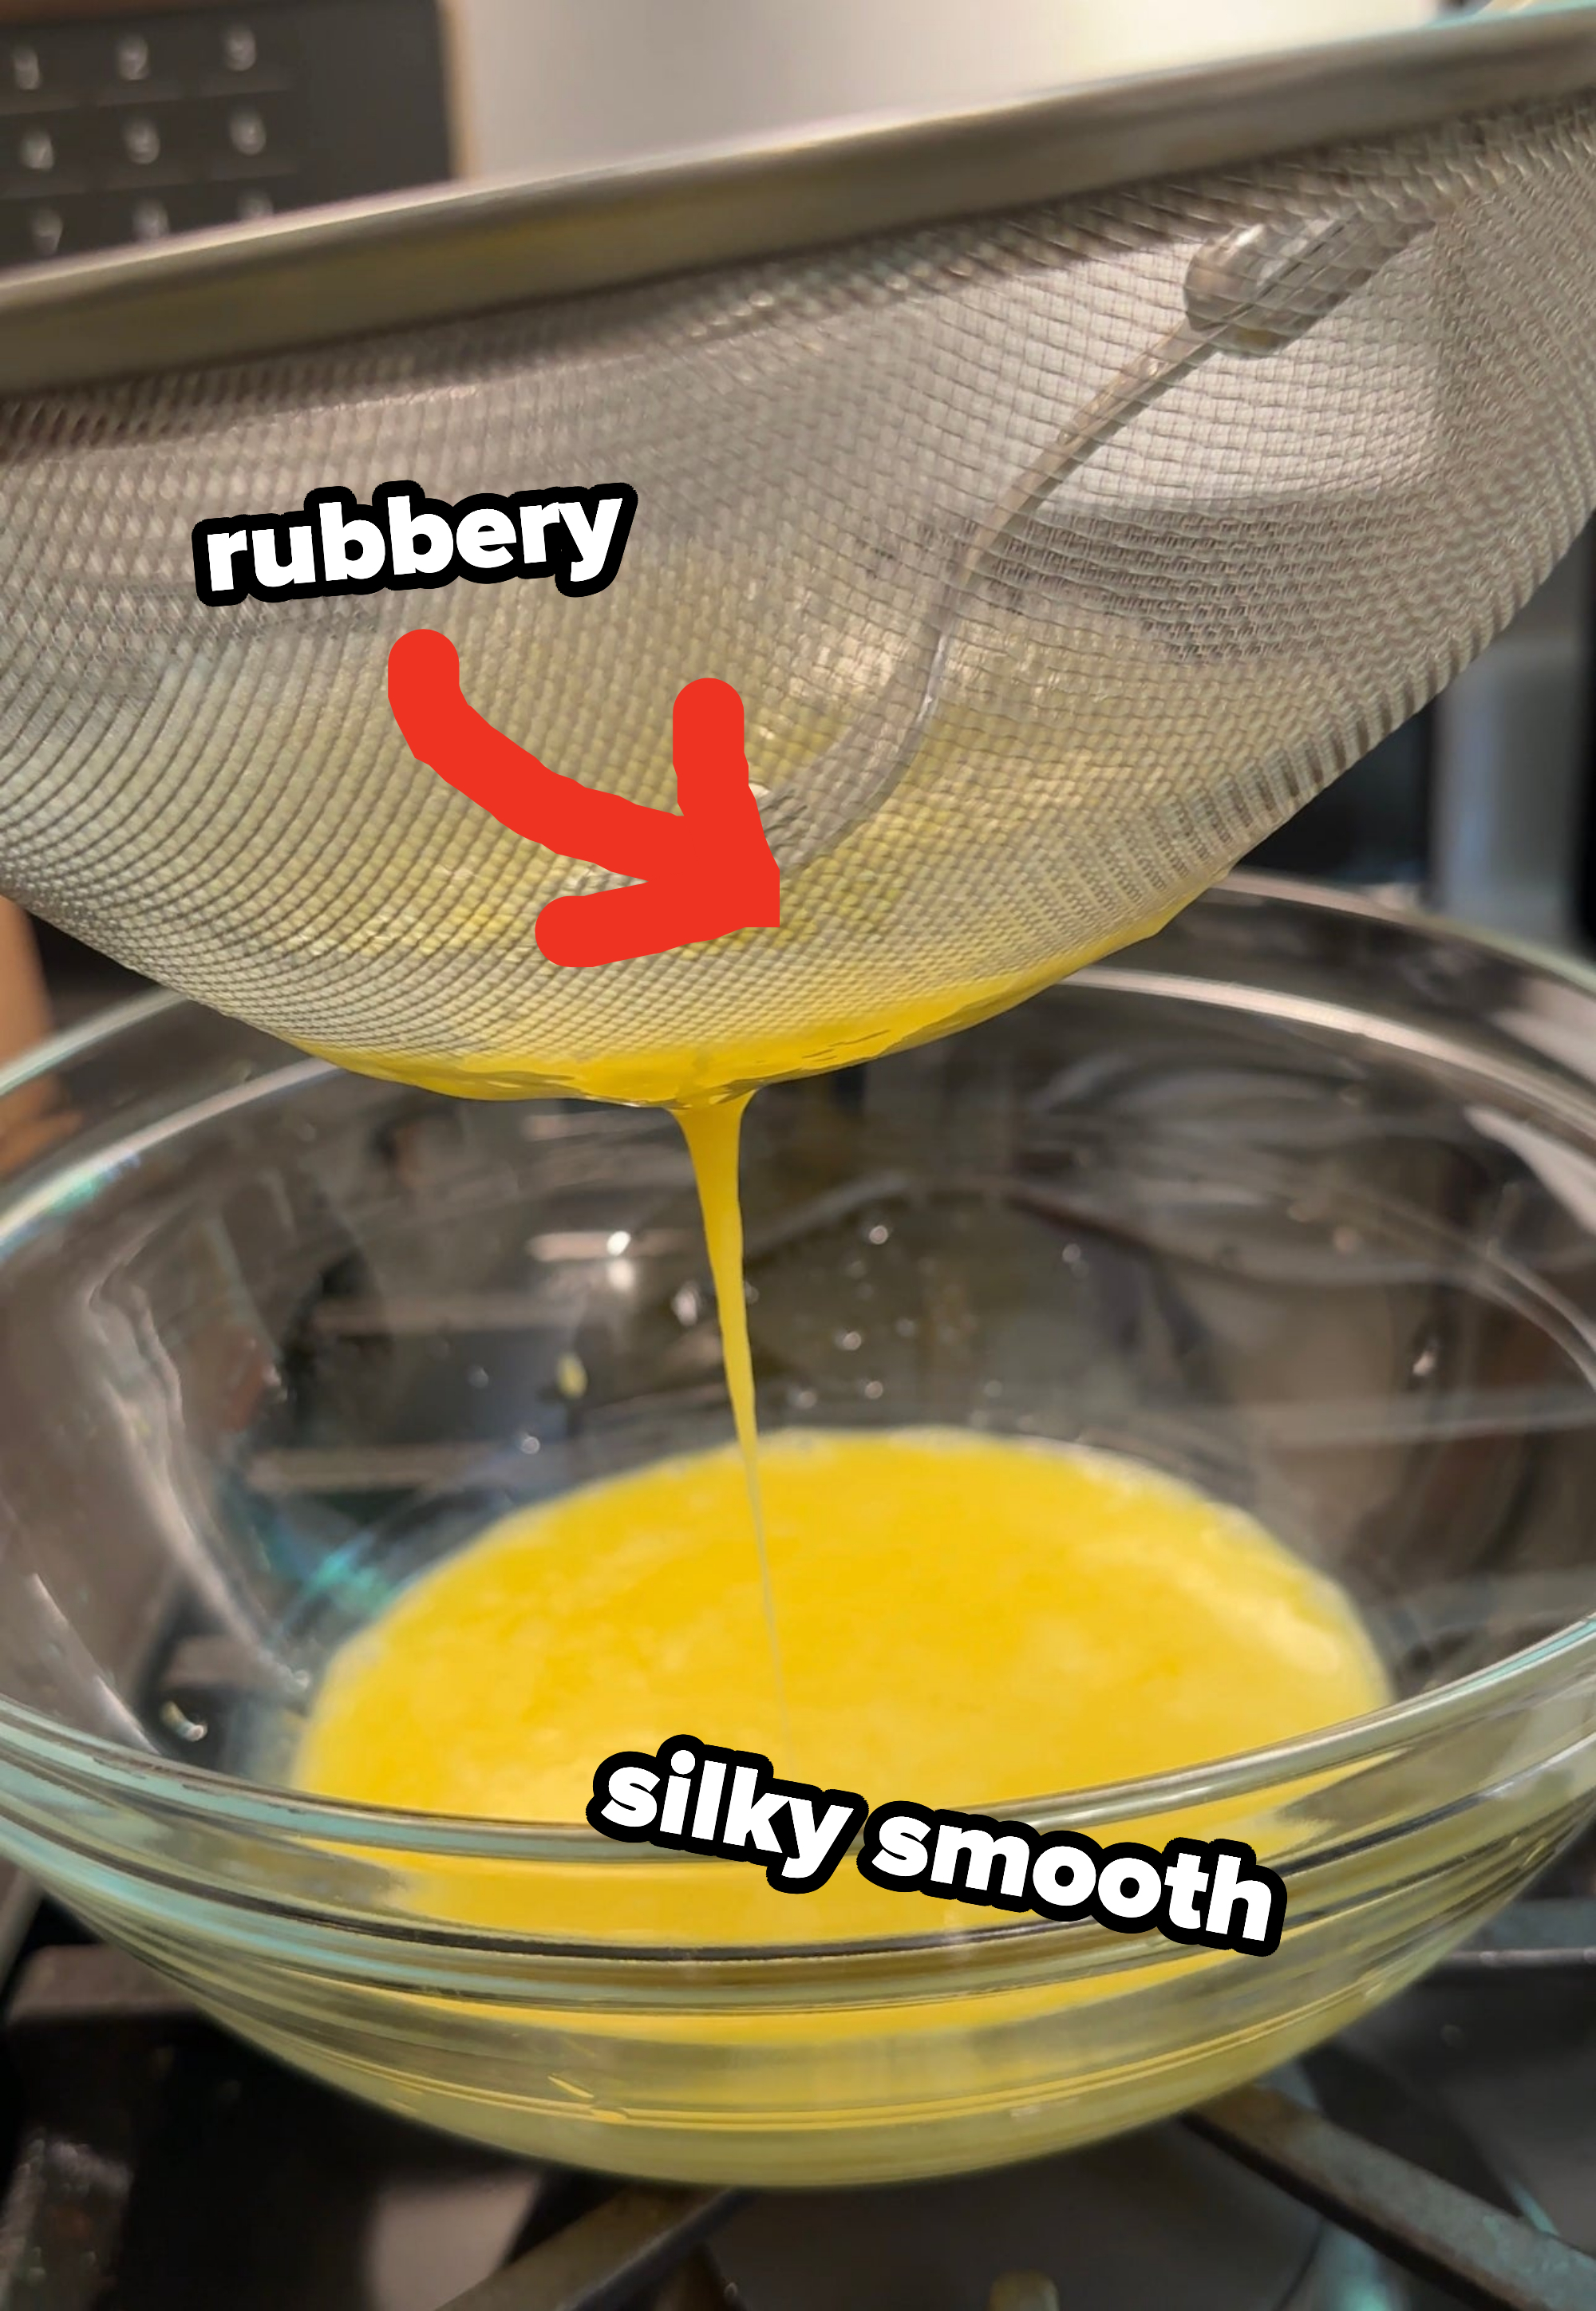 whisking rubbery eggs into a sieve with silky smooth beaten eggs coming out into a bowl